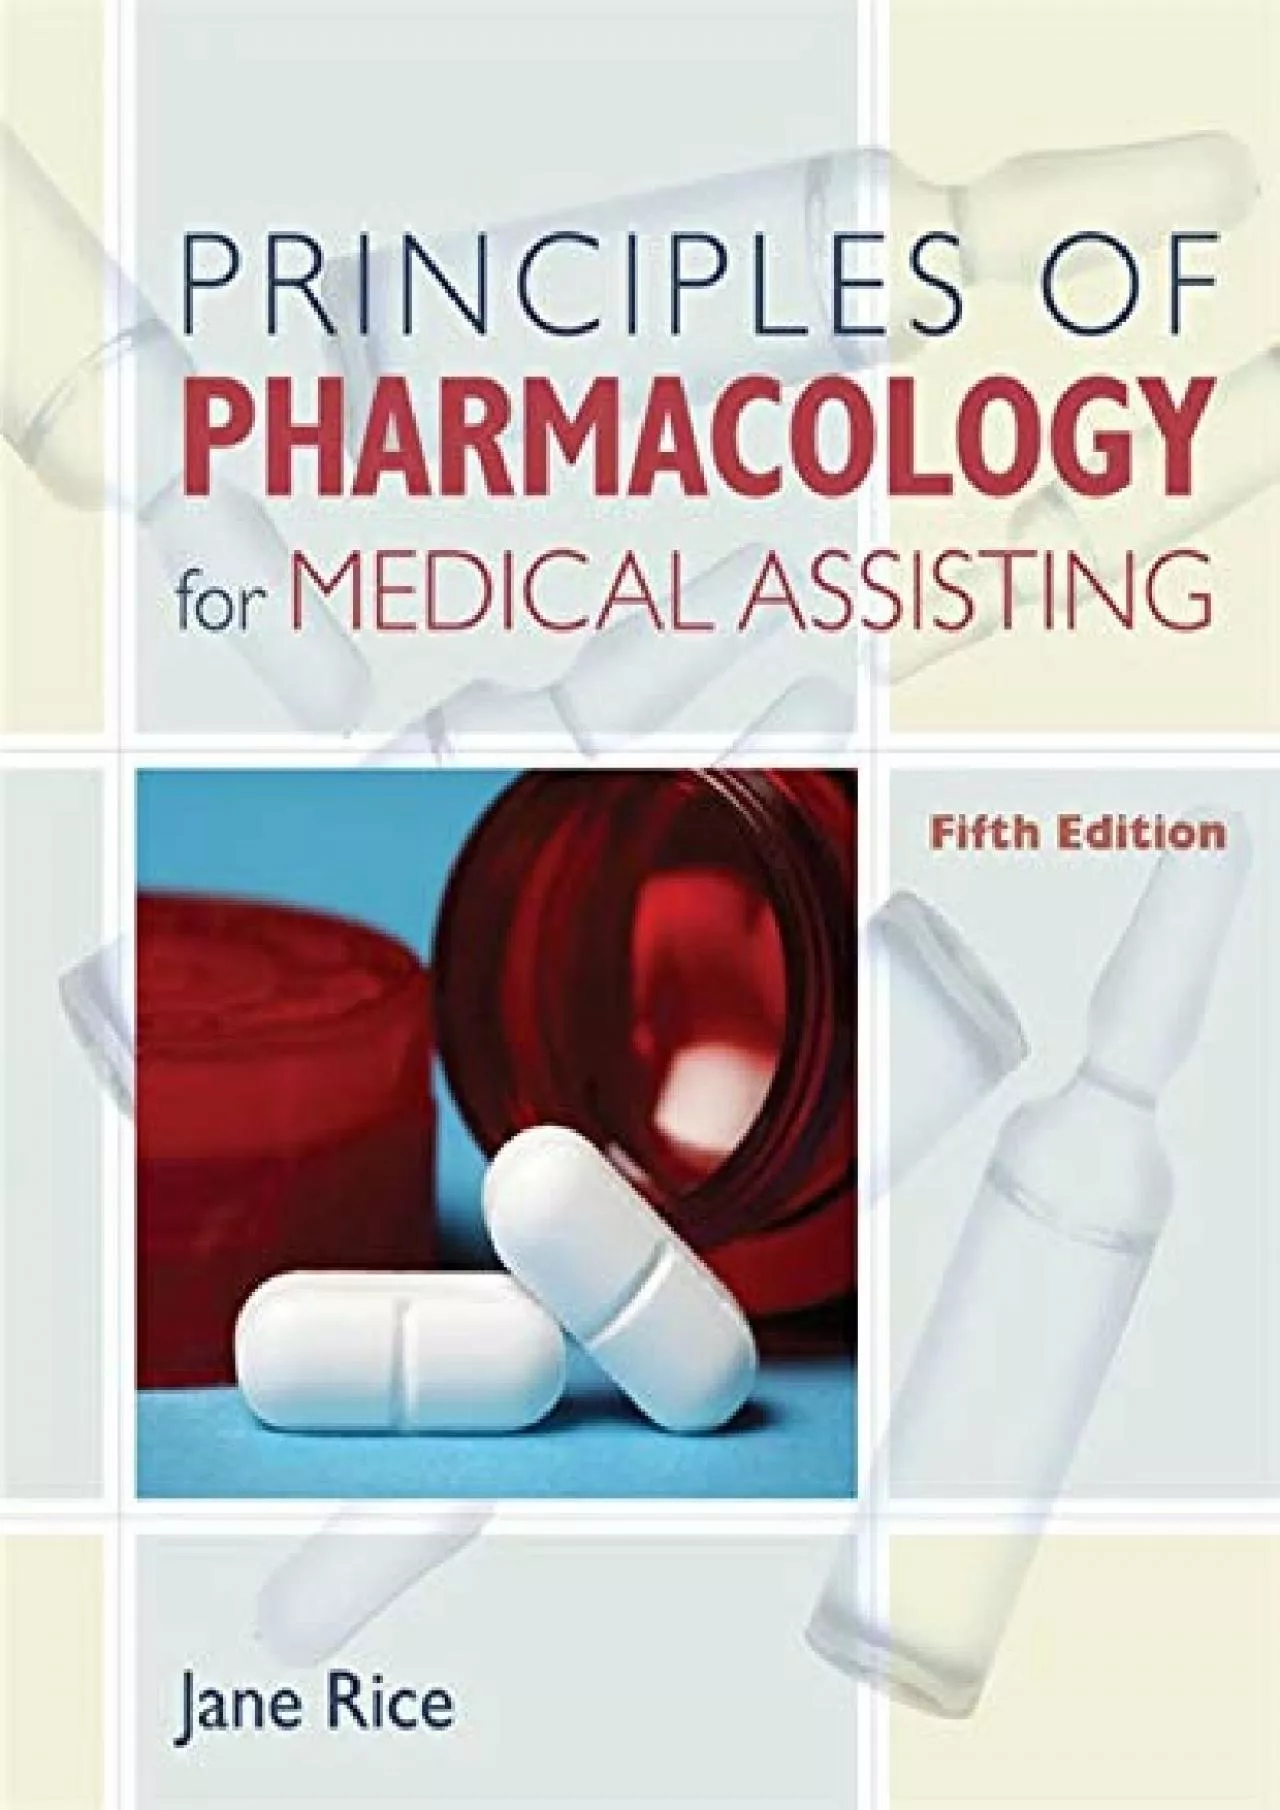 (EBOOK)-Principles of Pharmacology for Medical Assisting (Principles of Pharmacology for